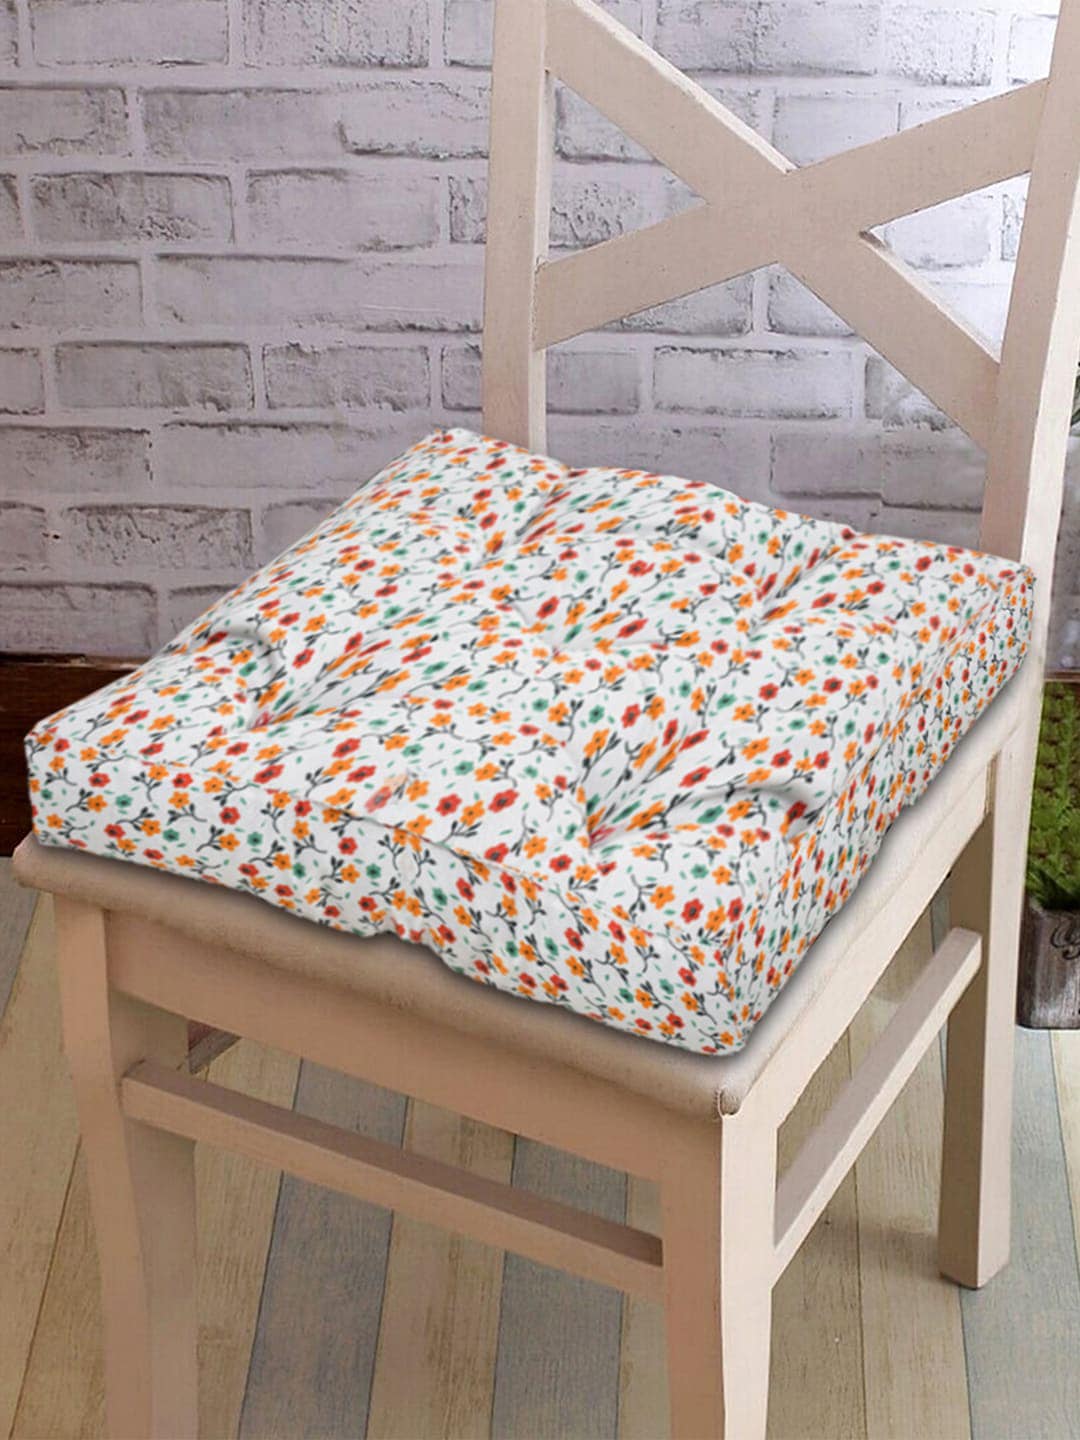 Kuber Industries Set of 2 White & Orange Floral Print Microfiber Square Chair Pads Price in India